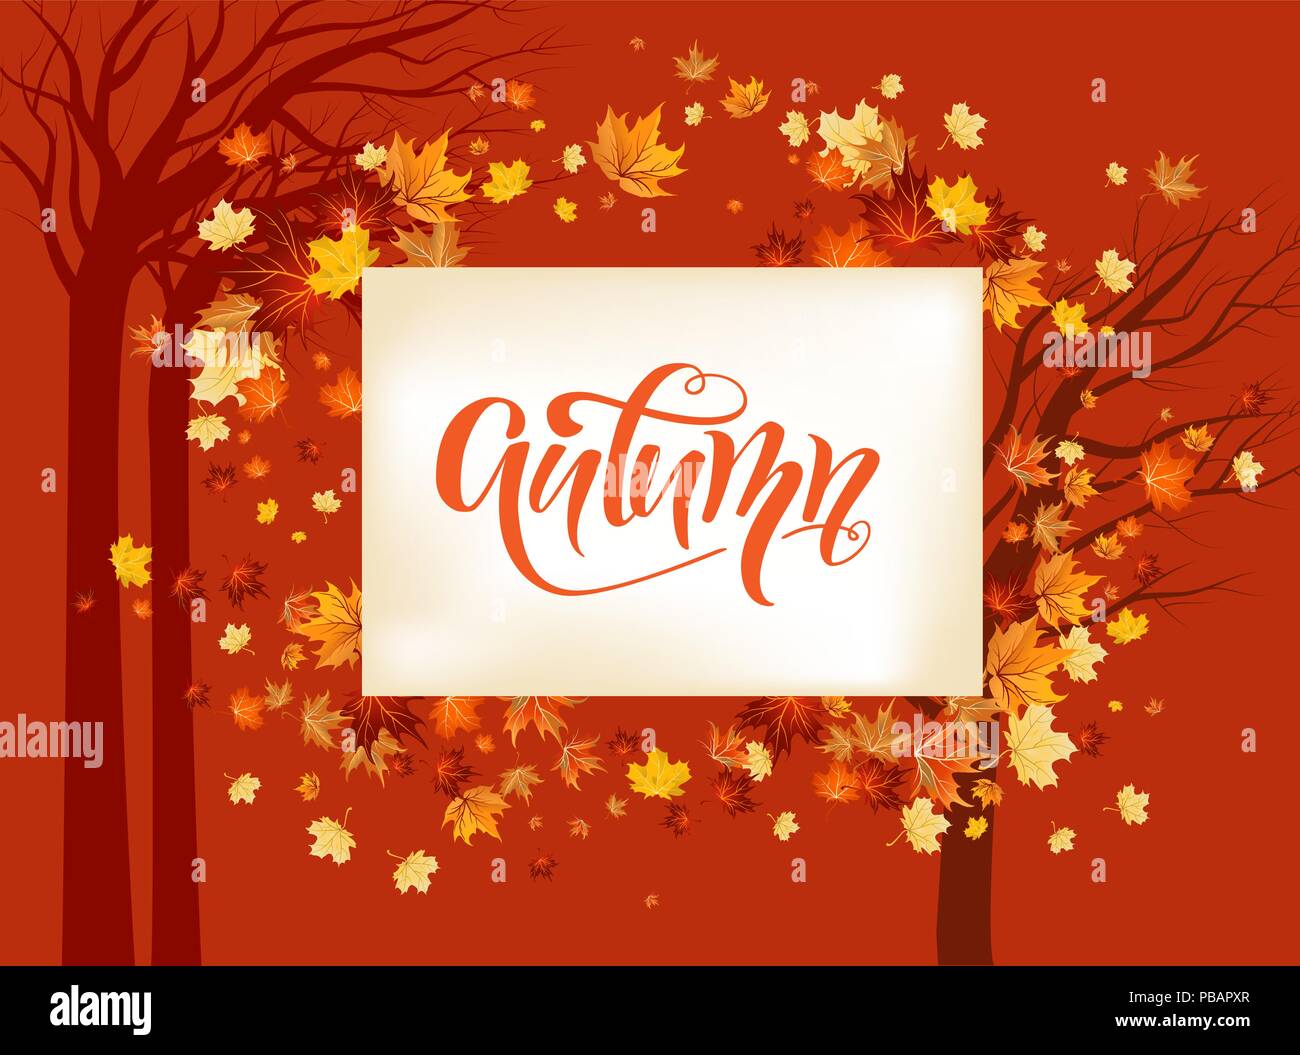 Fall maple leaves background. Stock Vector